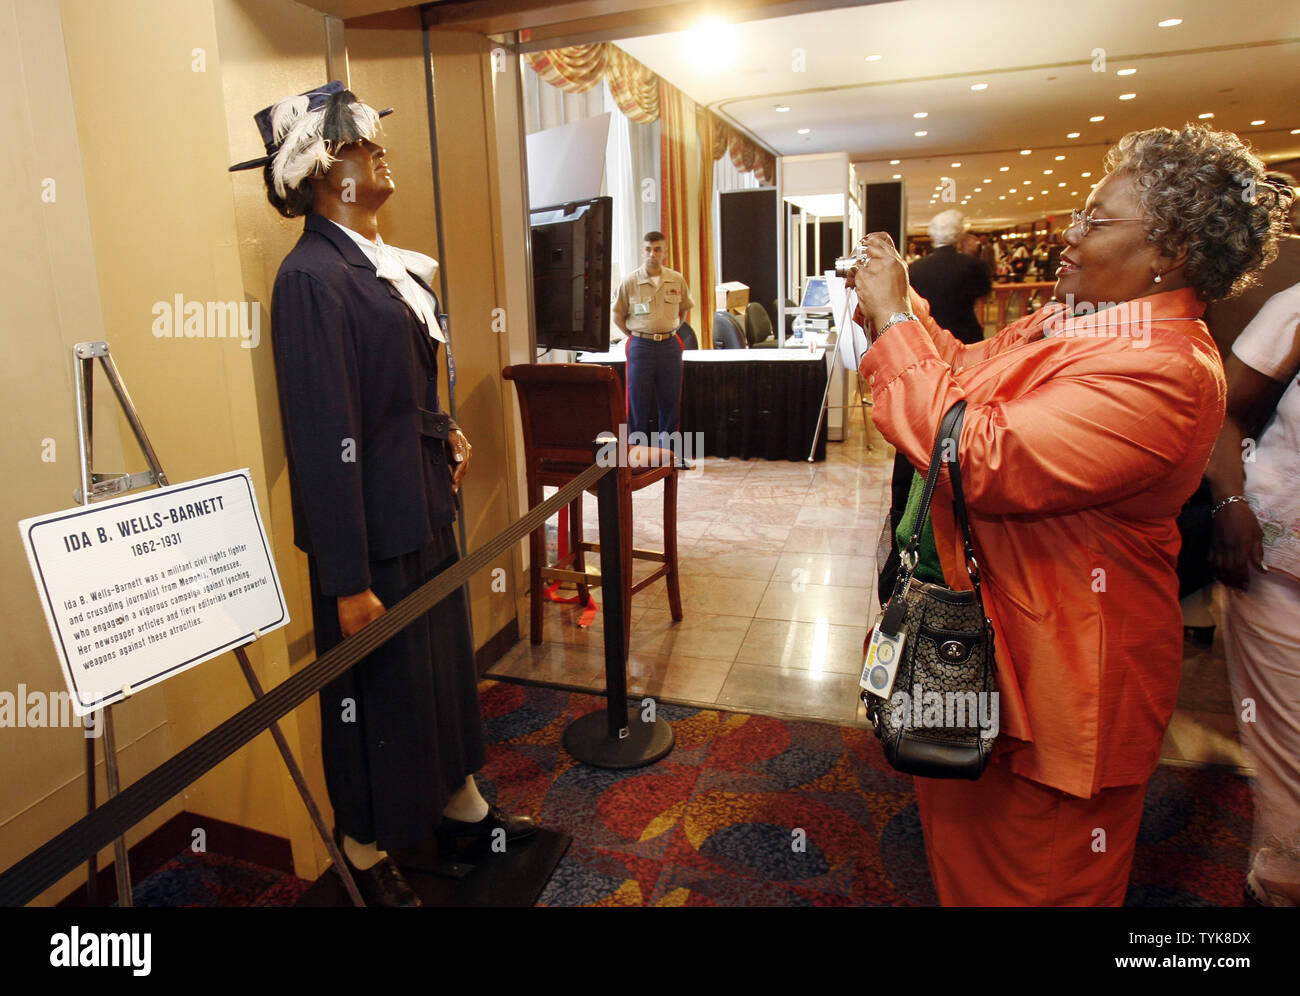 Attendees take pictures of a wax statue of Ida B. Wells-Barnett at the NAACP Centennial Convention in New York City on July 13, 2009.    (UPI Photo/John Angelillo)   . Stock Photo